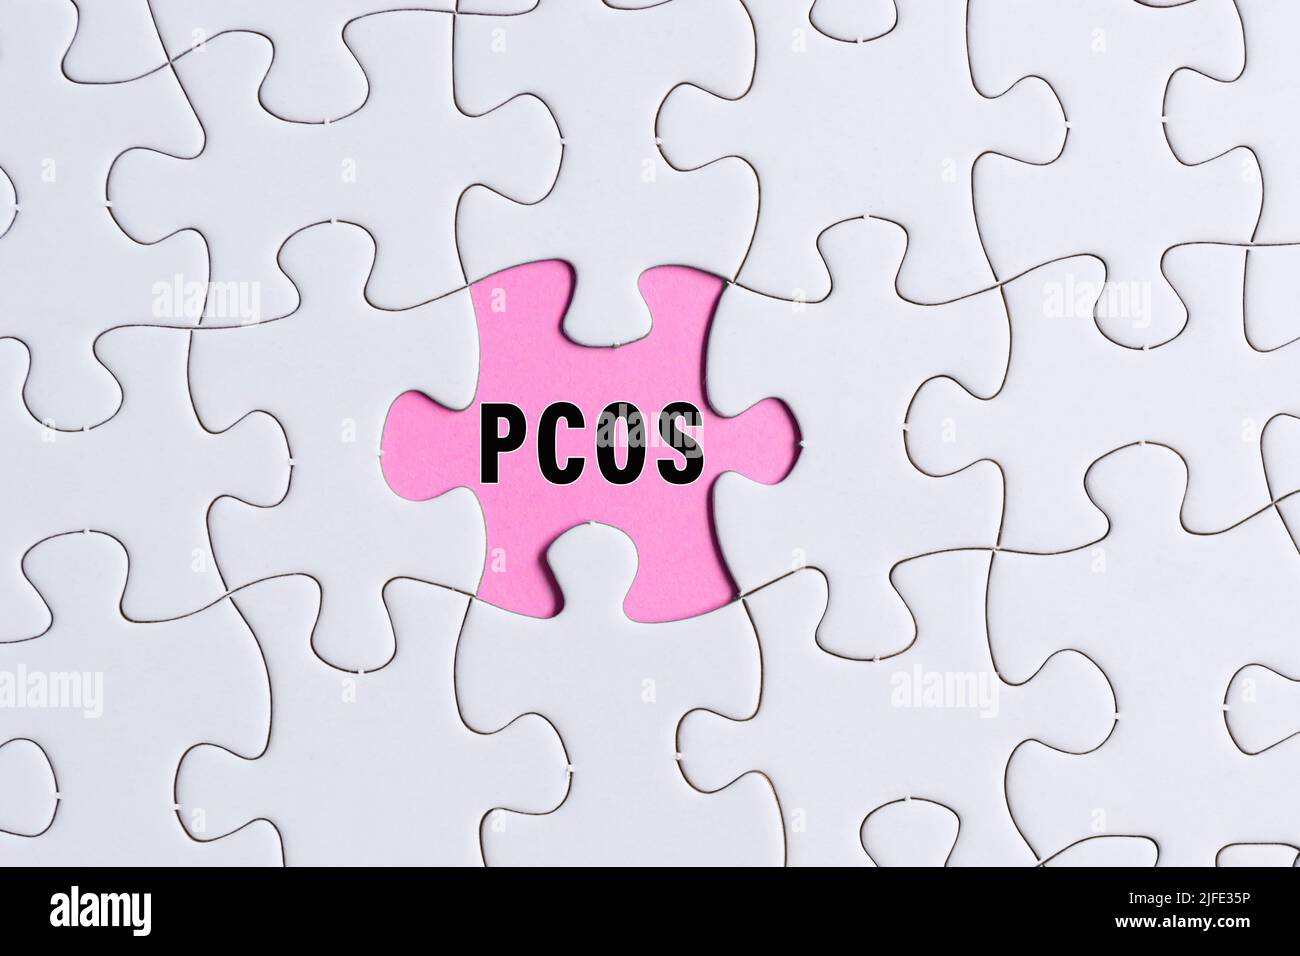 PCOS text on white jigsaw puzzle over pink background. Polycystic Ovary Syndrome Health Care concept. Stock Photo